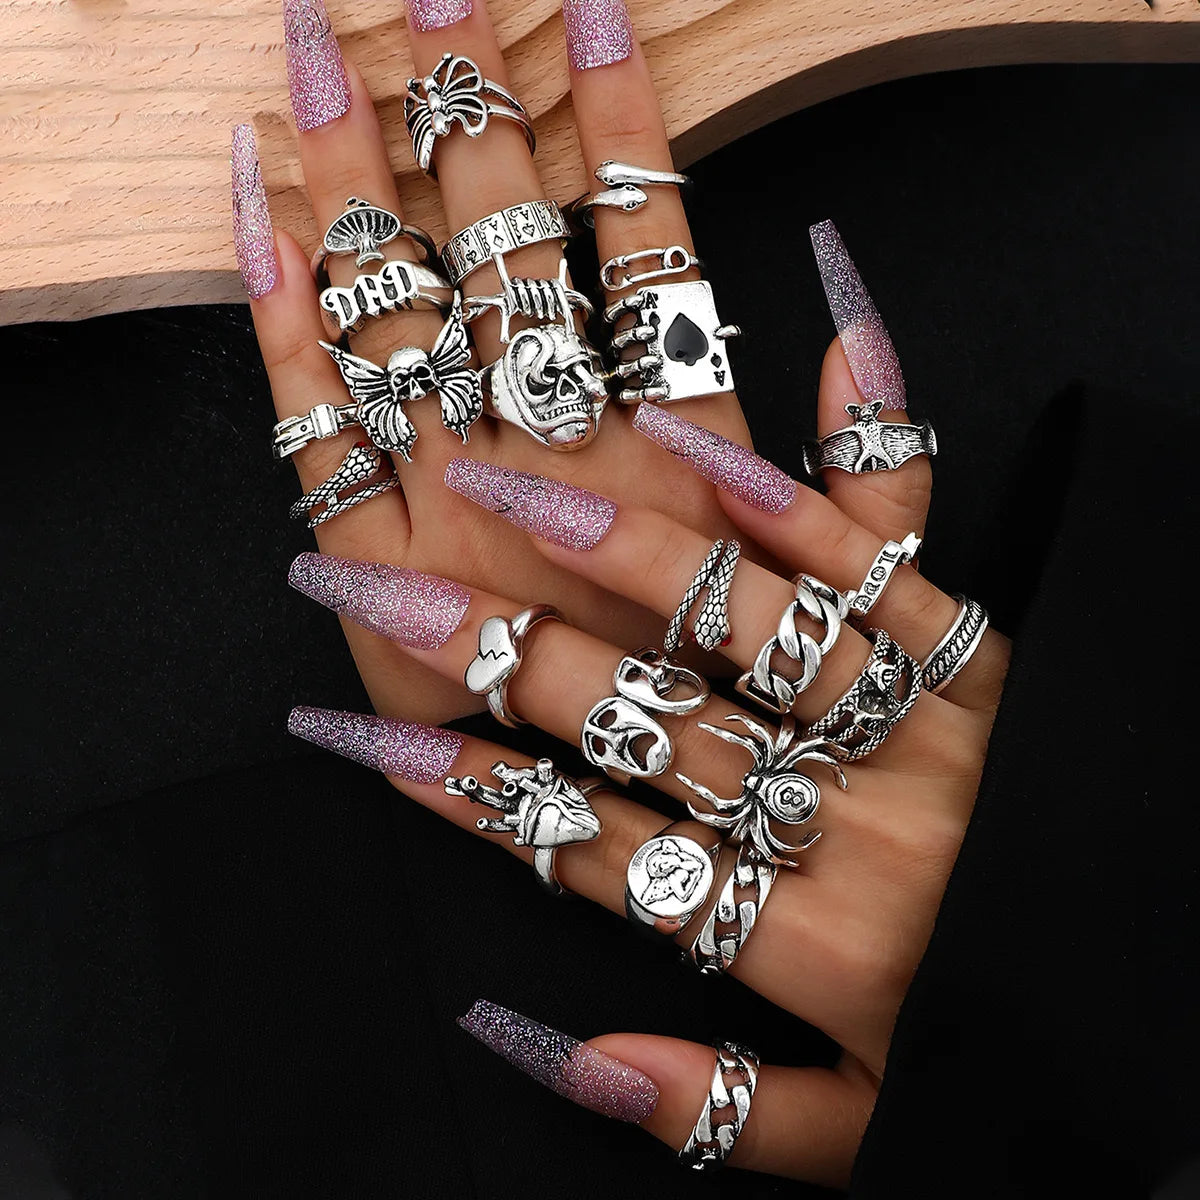 Vintage Punk Metal Multi Element Ring Set for Women Men Antique Silver Color Butterfly Snake Skull Finger Rings Gothic Jewelry